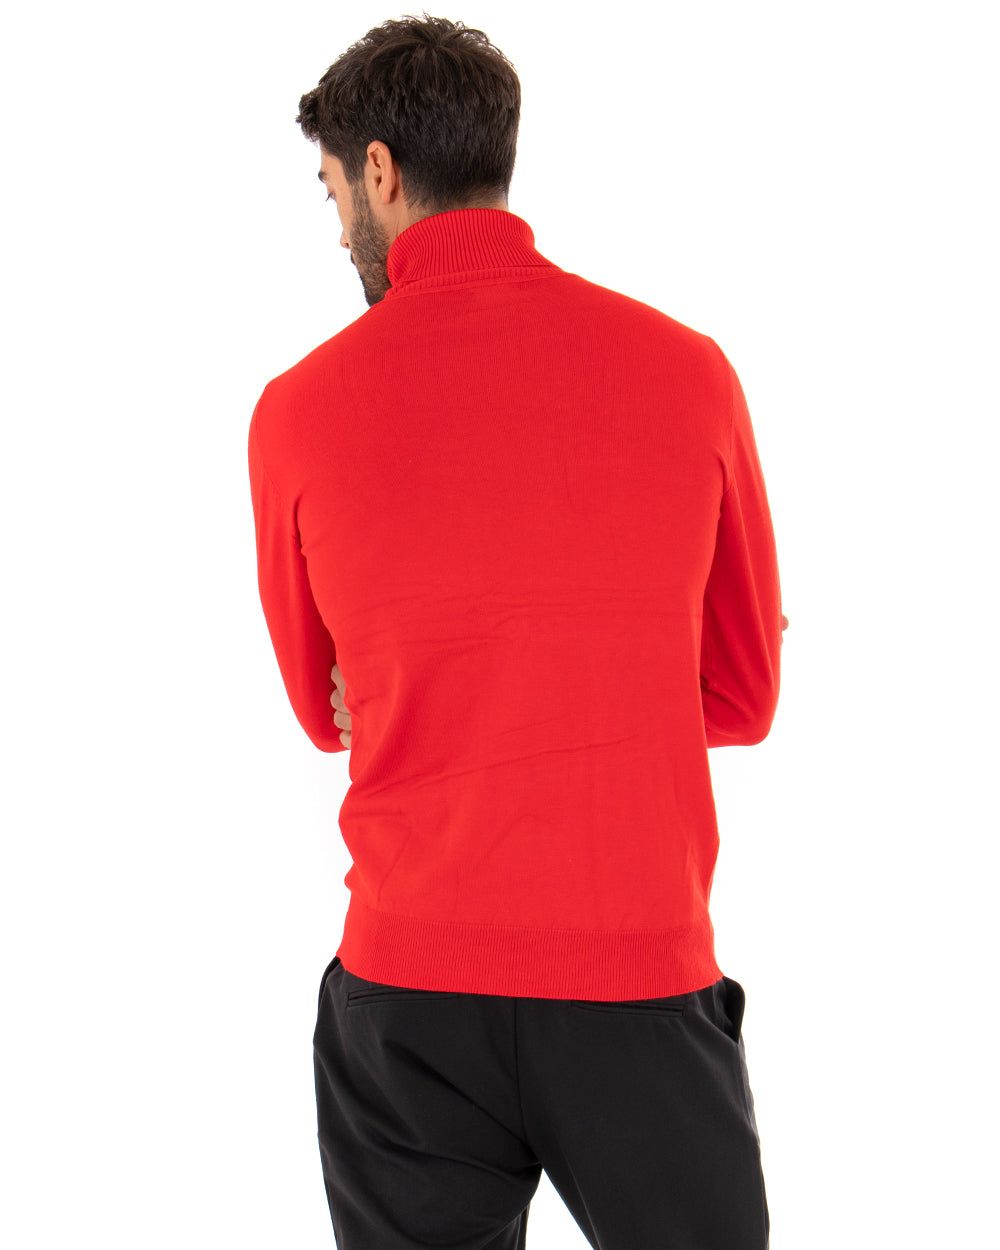 Men's Sweater Long Sleeves Elastic High Neck Solid Color Red GIOSAL M2546A